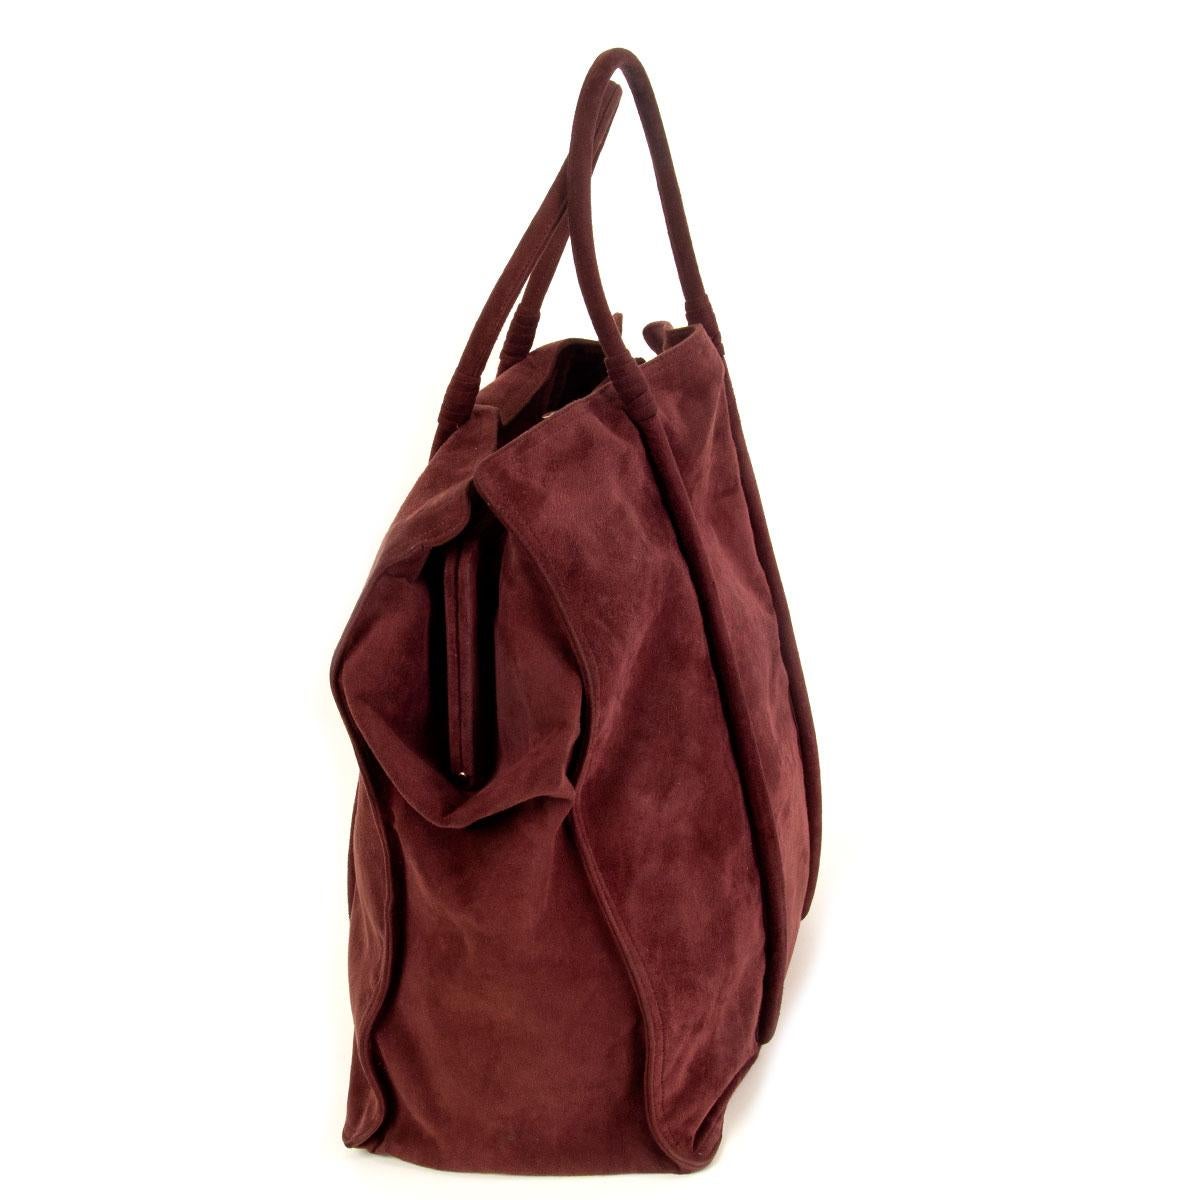 100% authentic Bottega Veneta tote bag in burgundy suede. Interior is divided in three compartments and the middle one opens with a gold-tone metal closure and has one big zip pocket on the inside. Bag is lined in canvas and smooth lambskin. Has